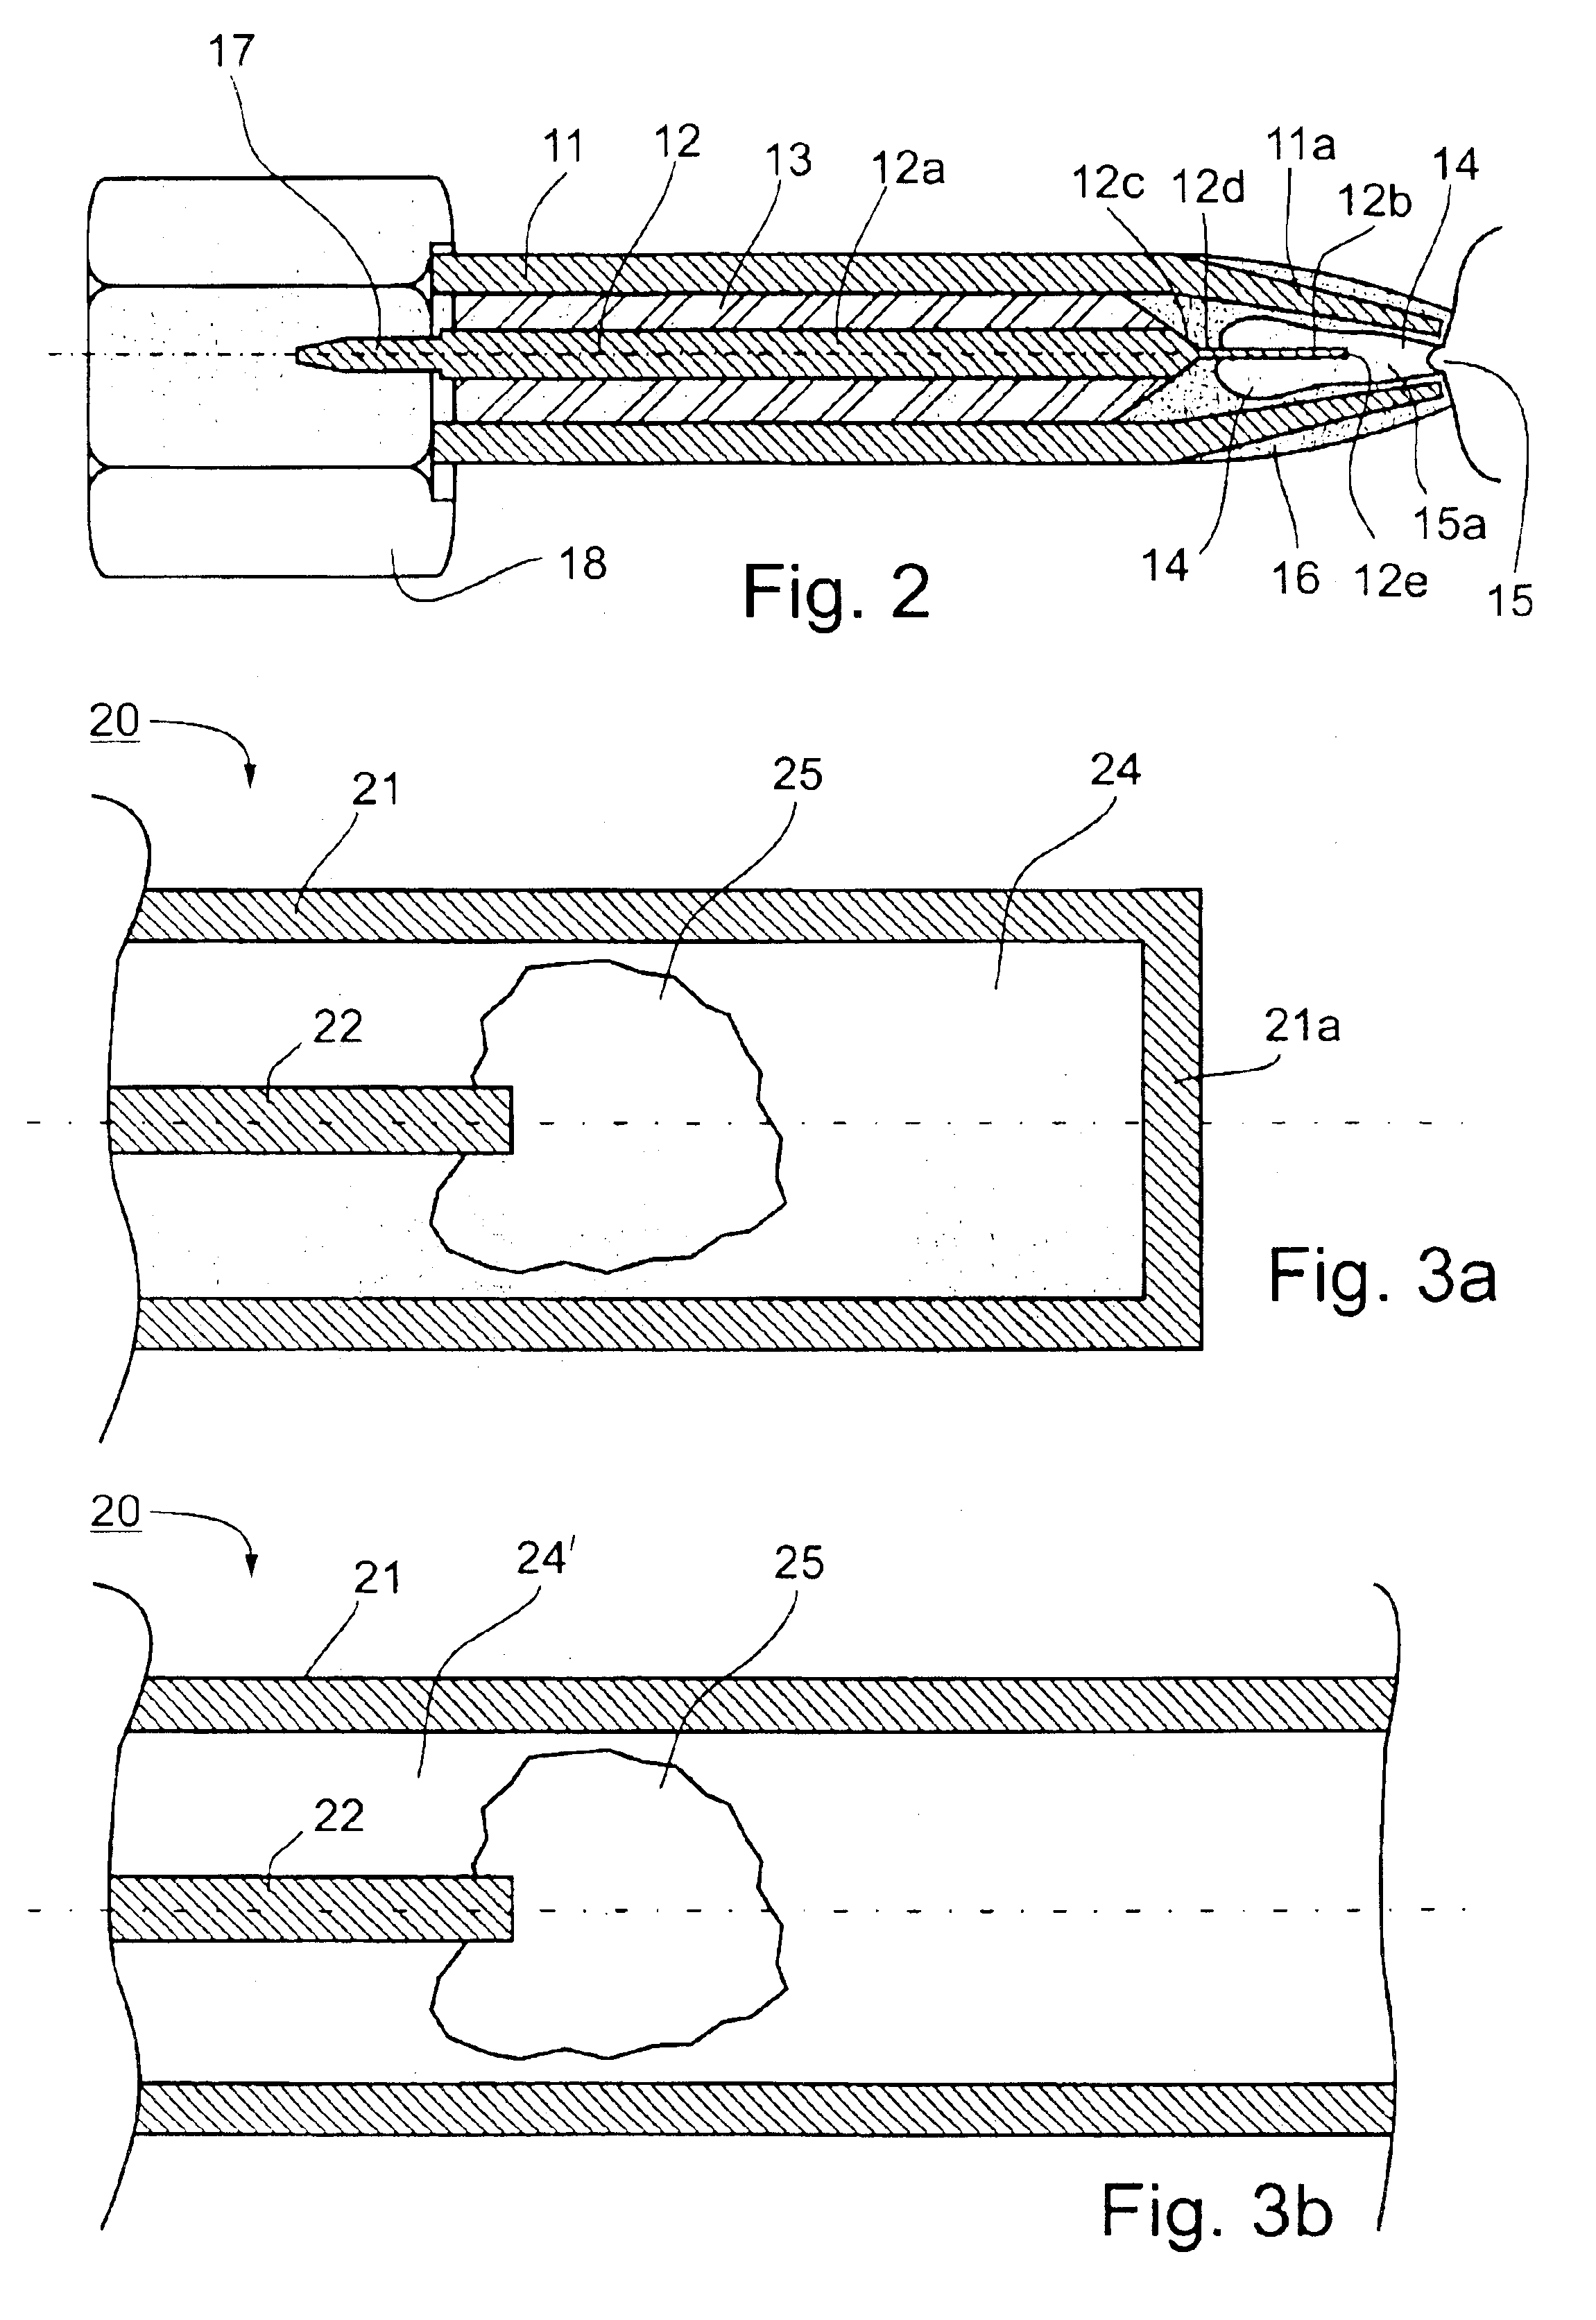 Method and system for examining tissue according to the dielectric properties thereof